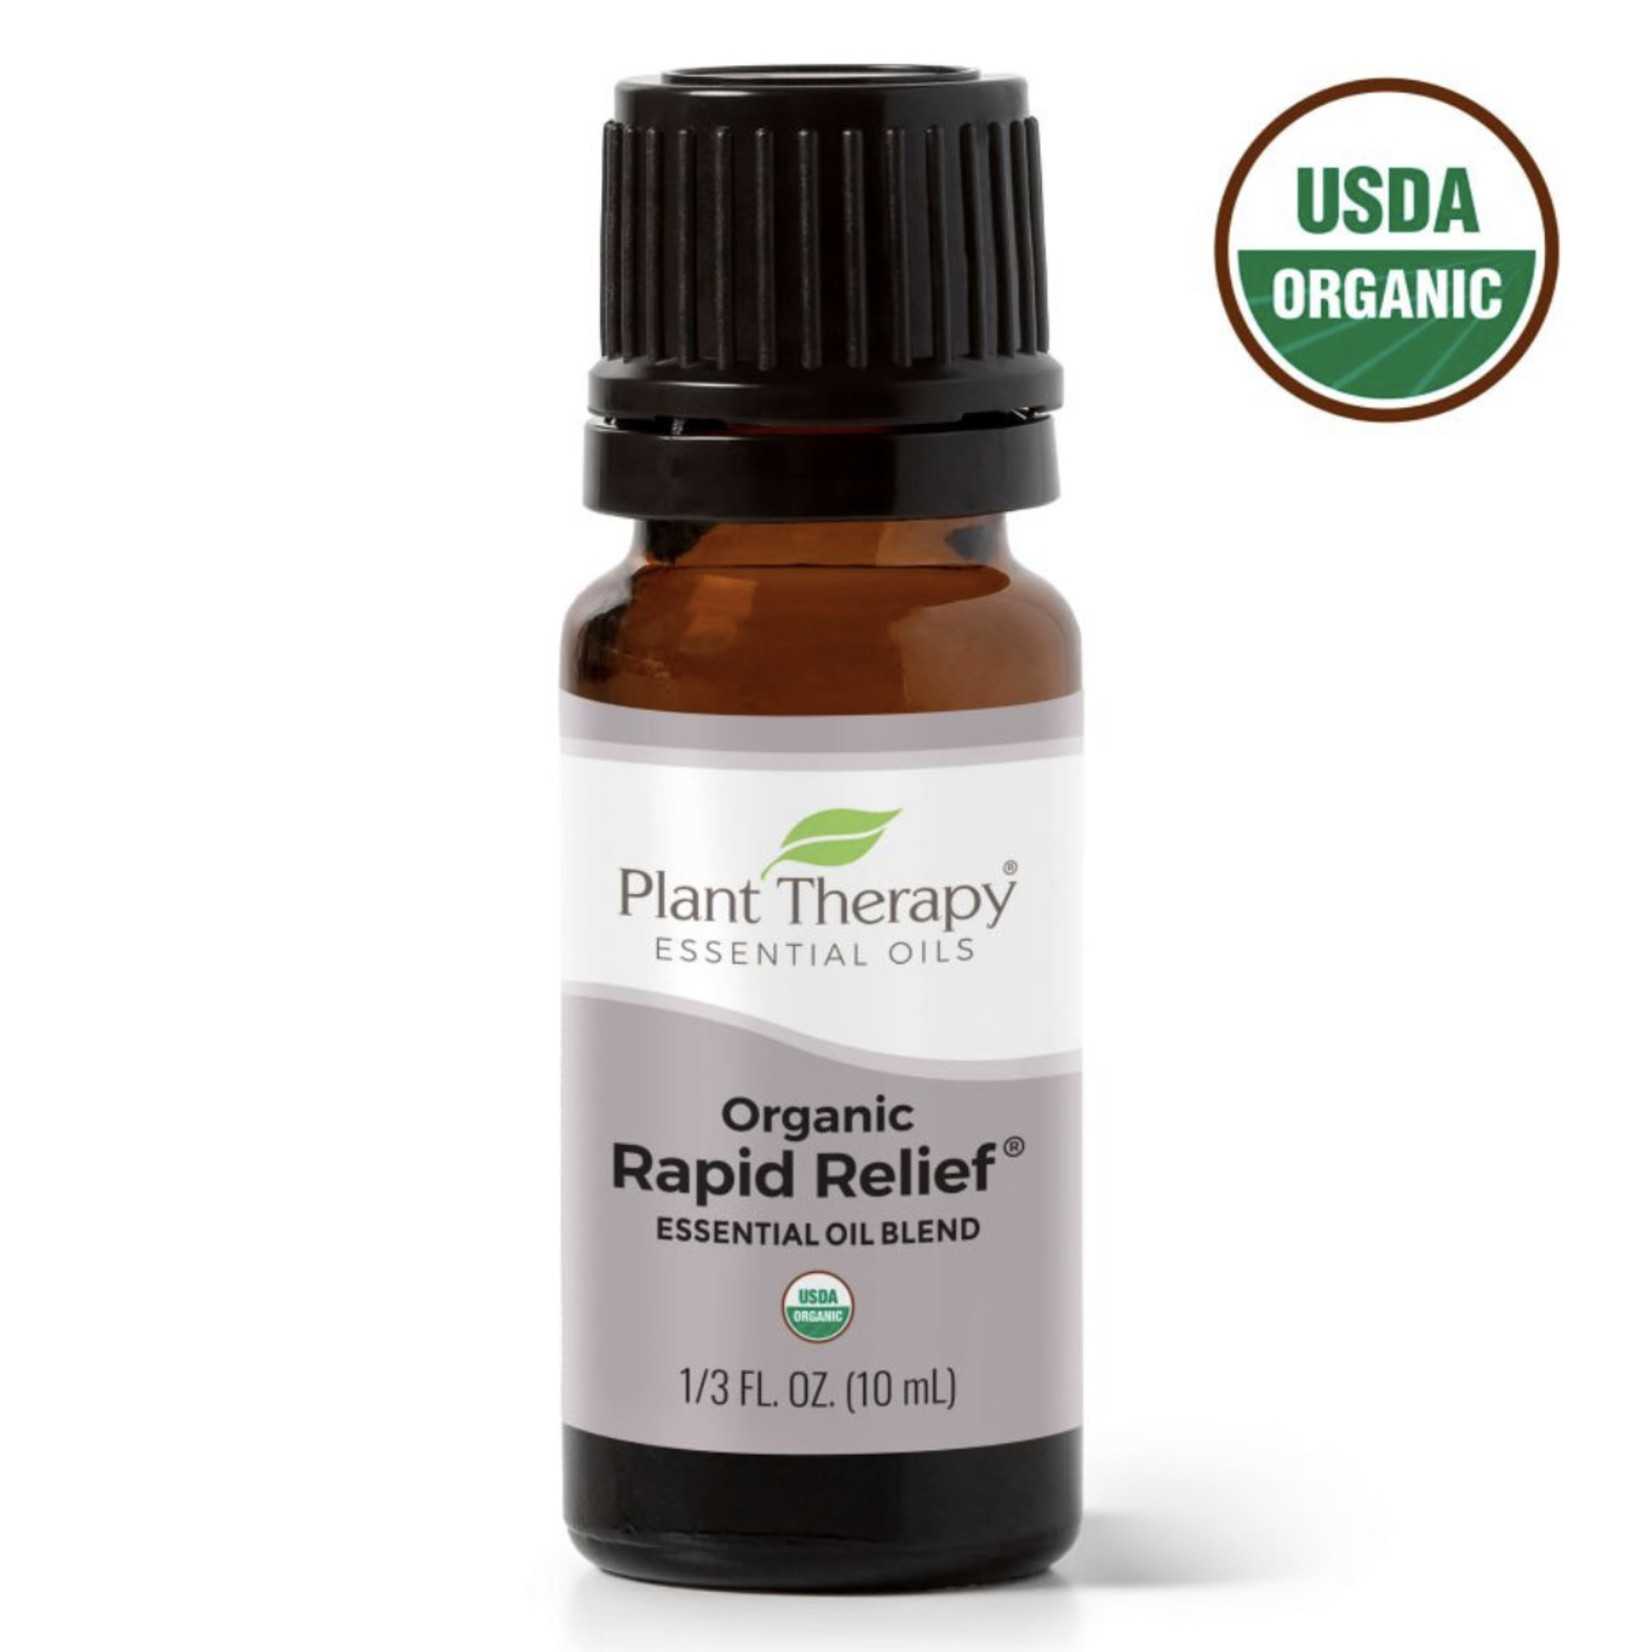 Plant Therapy Organic Rapid Relief Essential Oil Blend